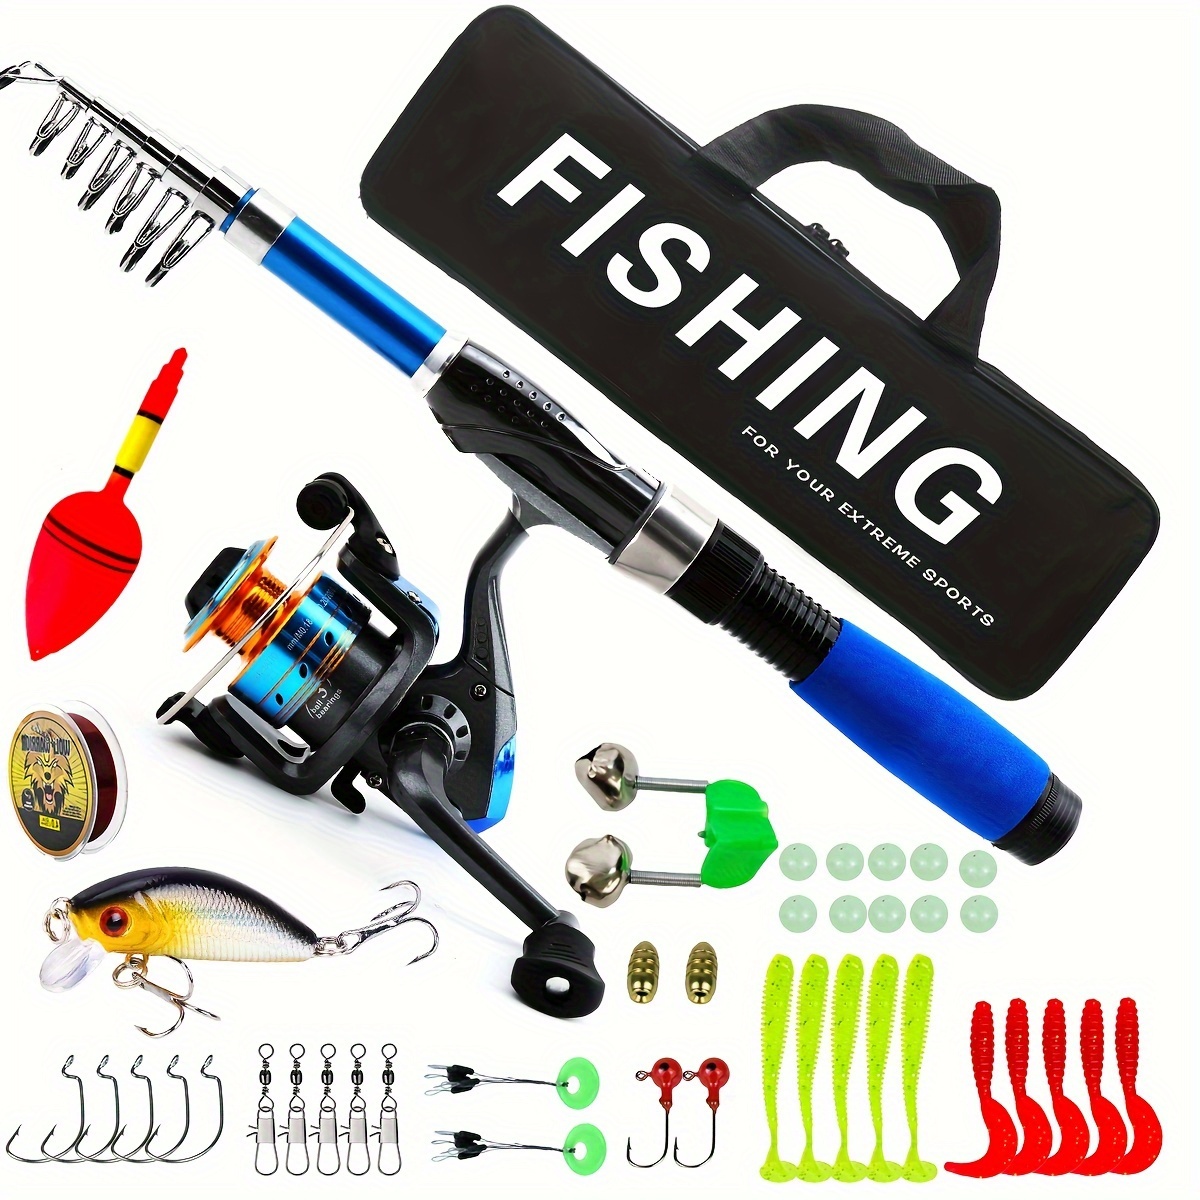 Travel Telescopic Fishing Tackle Combo Kit, Including 1.7m/5.5ft Feeder  Rod, Spinning Reel, Fishing Line, Soft Hard Bait And More Accessories